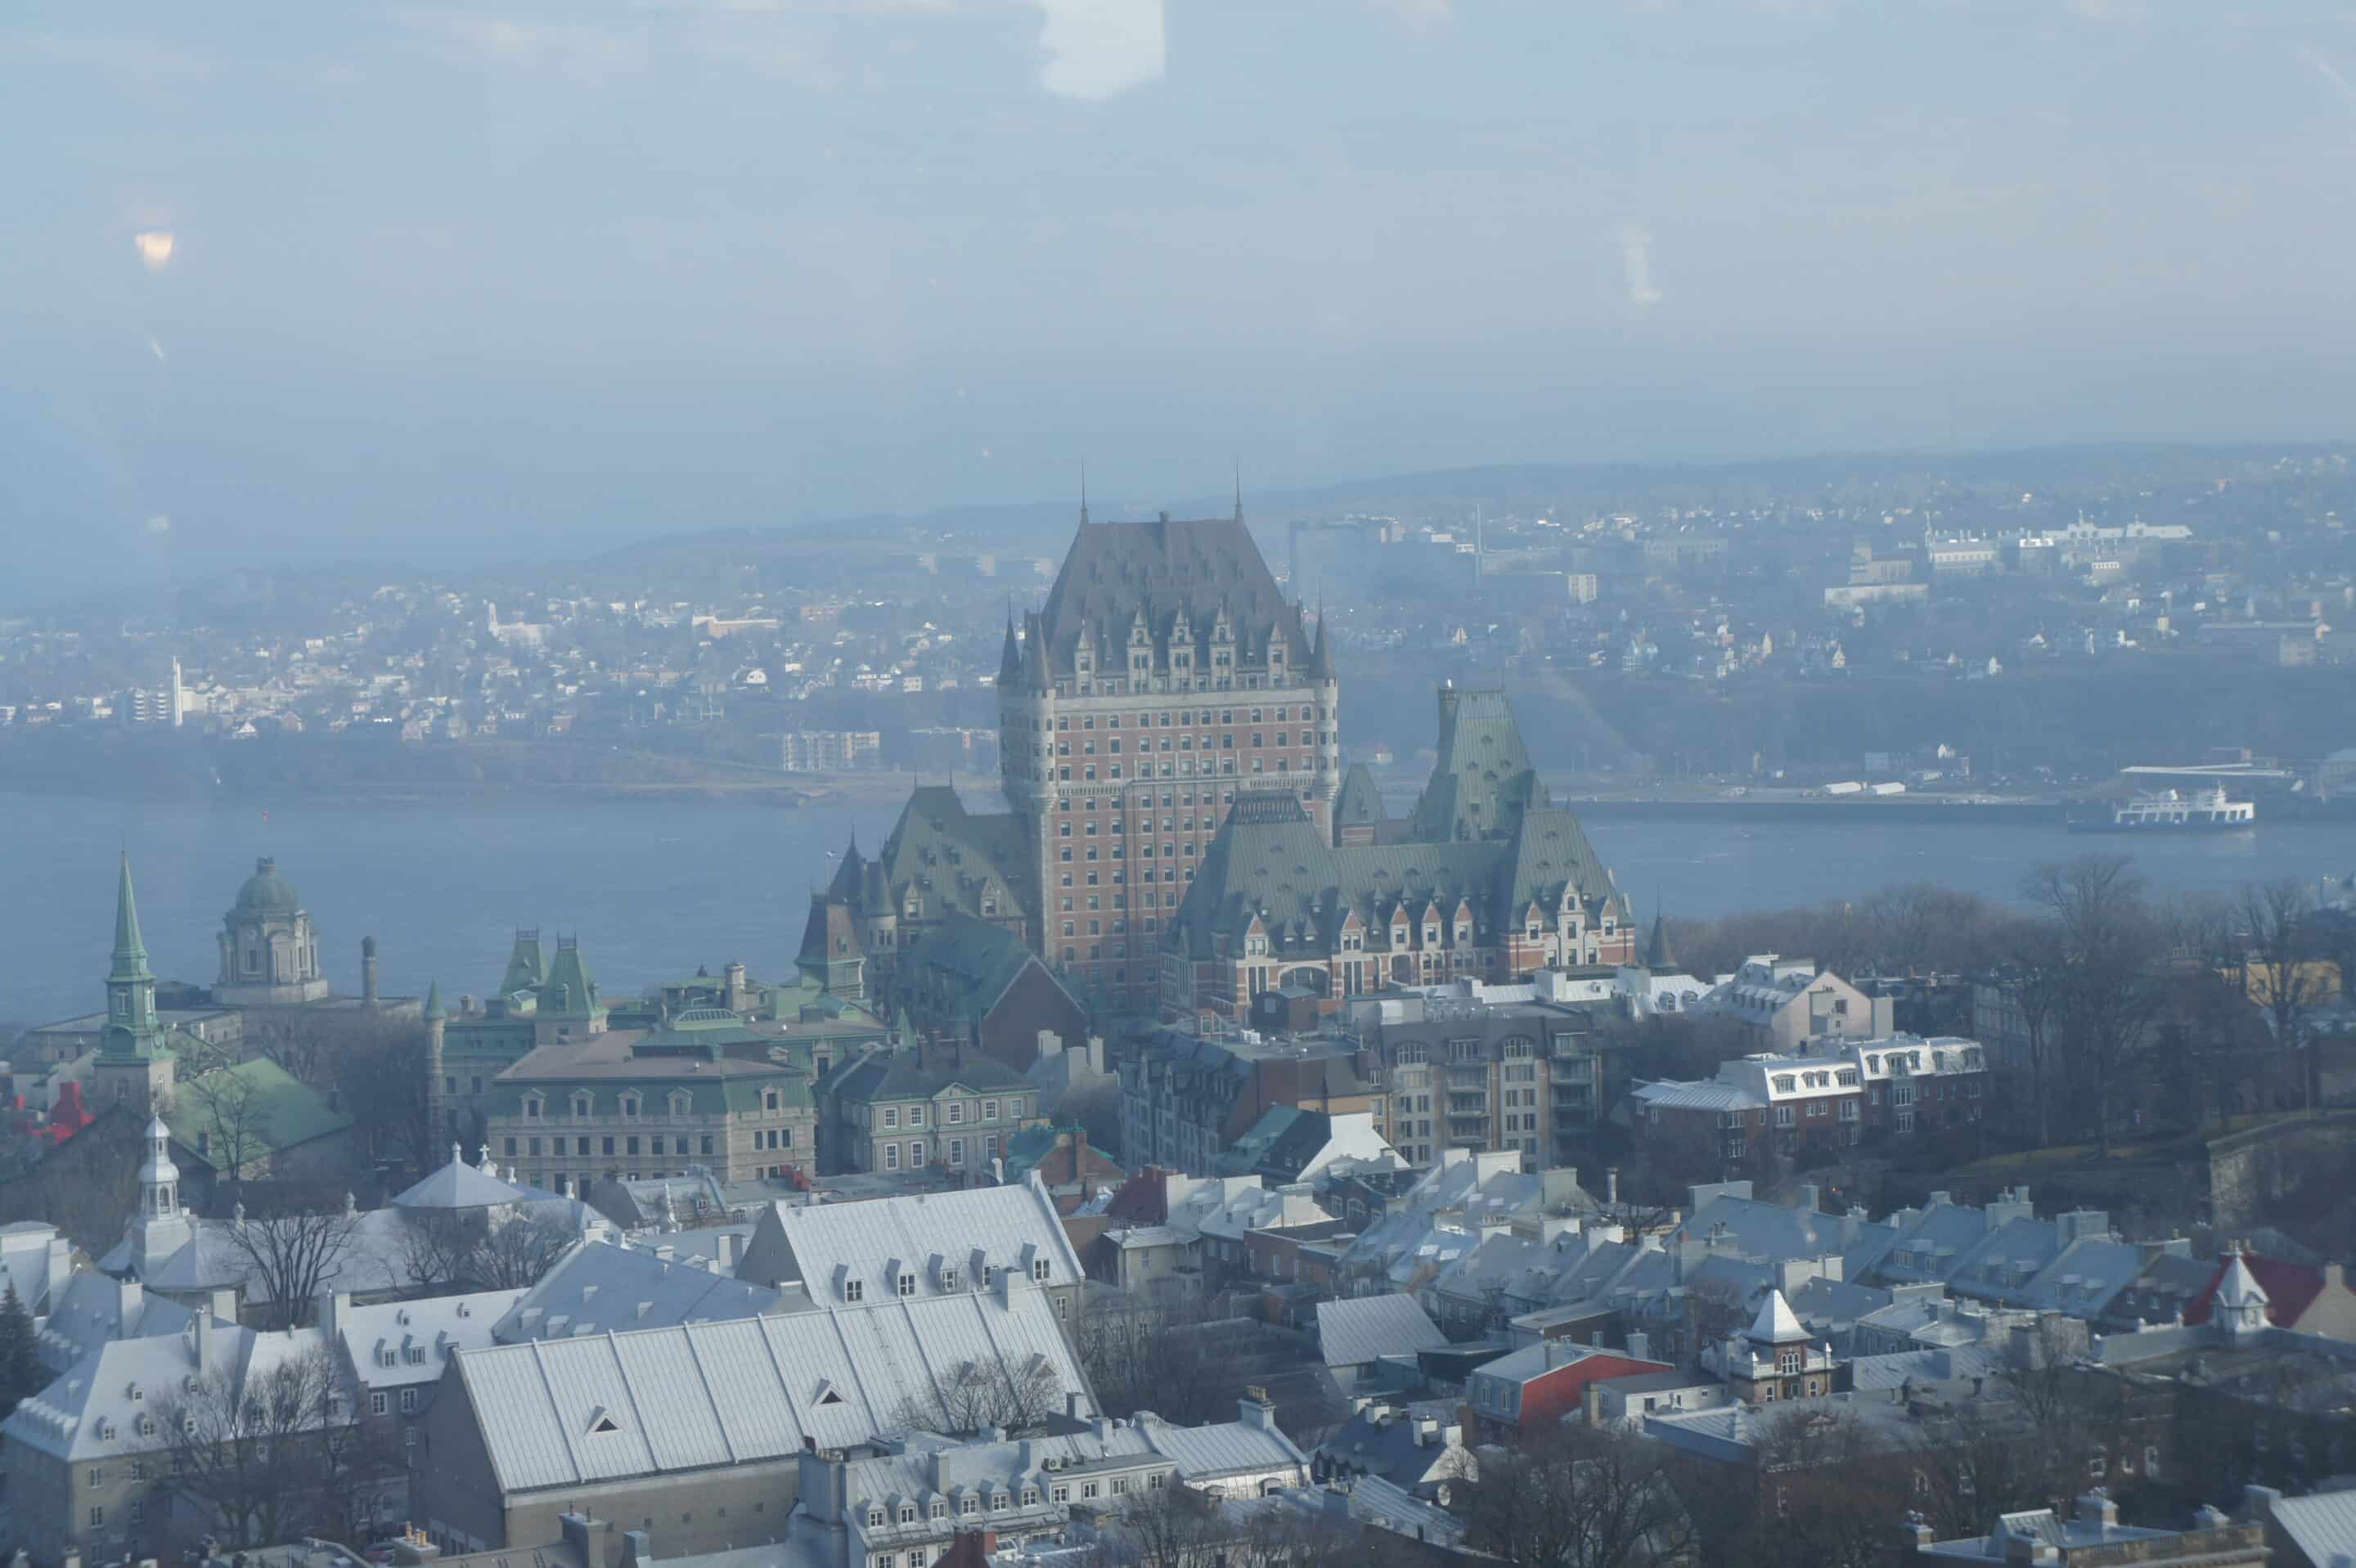 Chateau de Frontenac dominates the skyline of Québec City as seen from the 23rd floor of the Hilton Hotel.